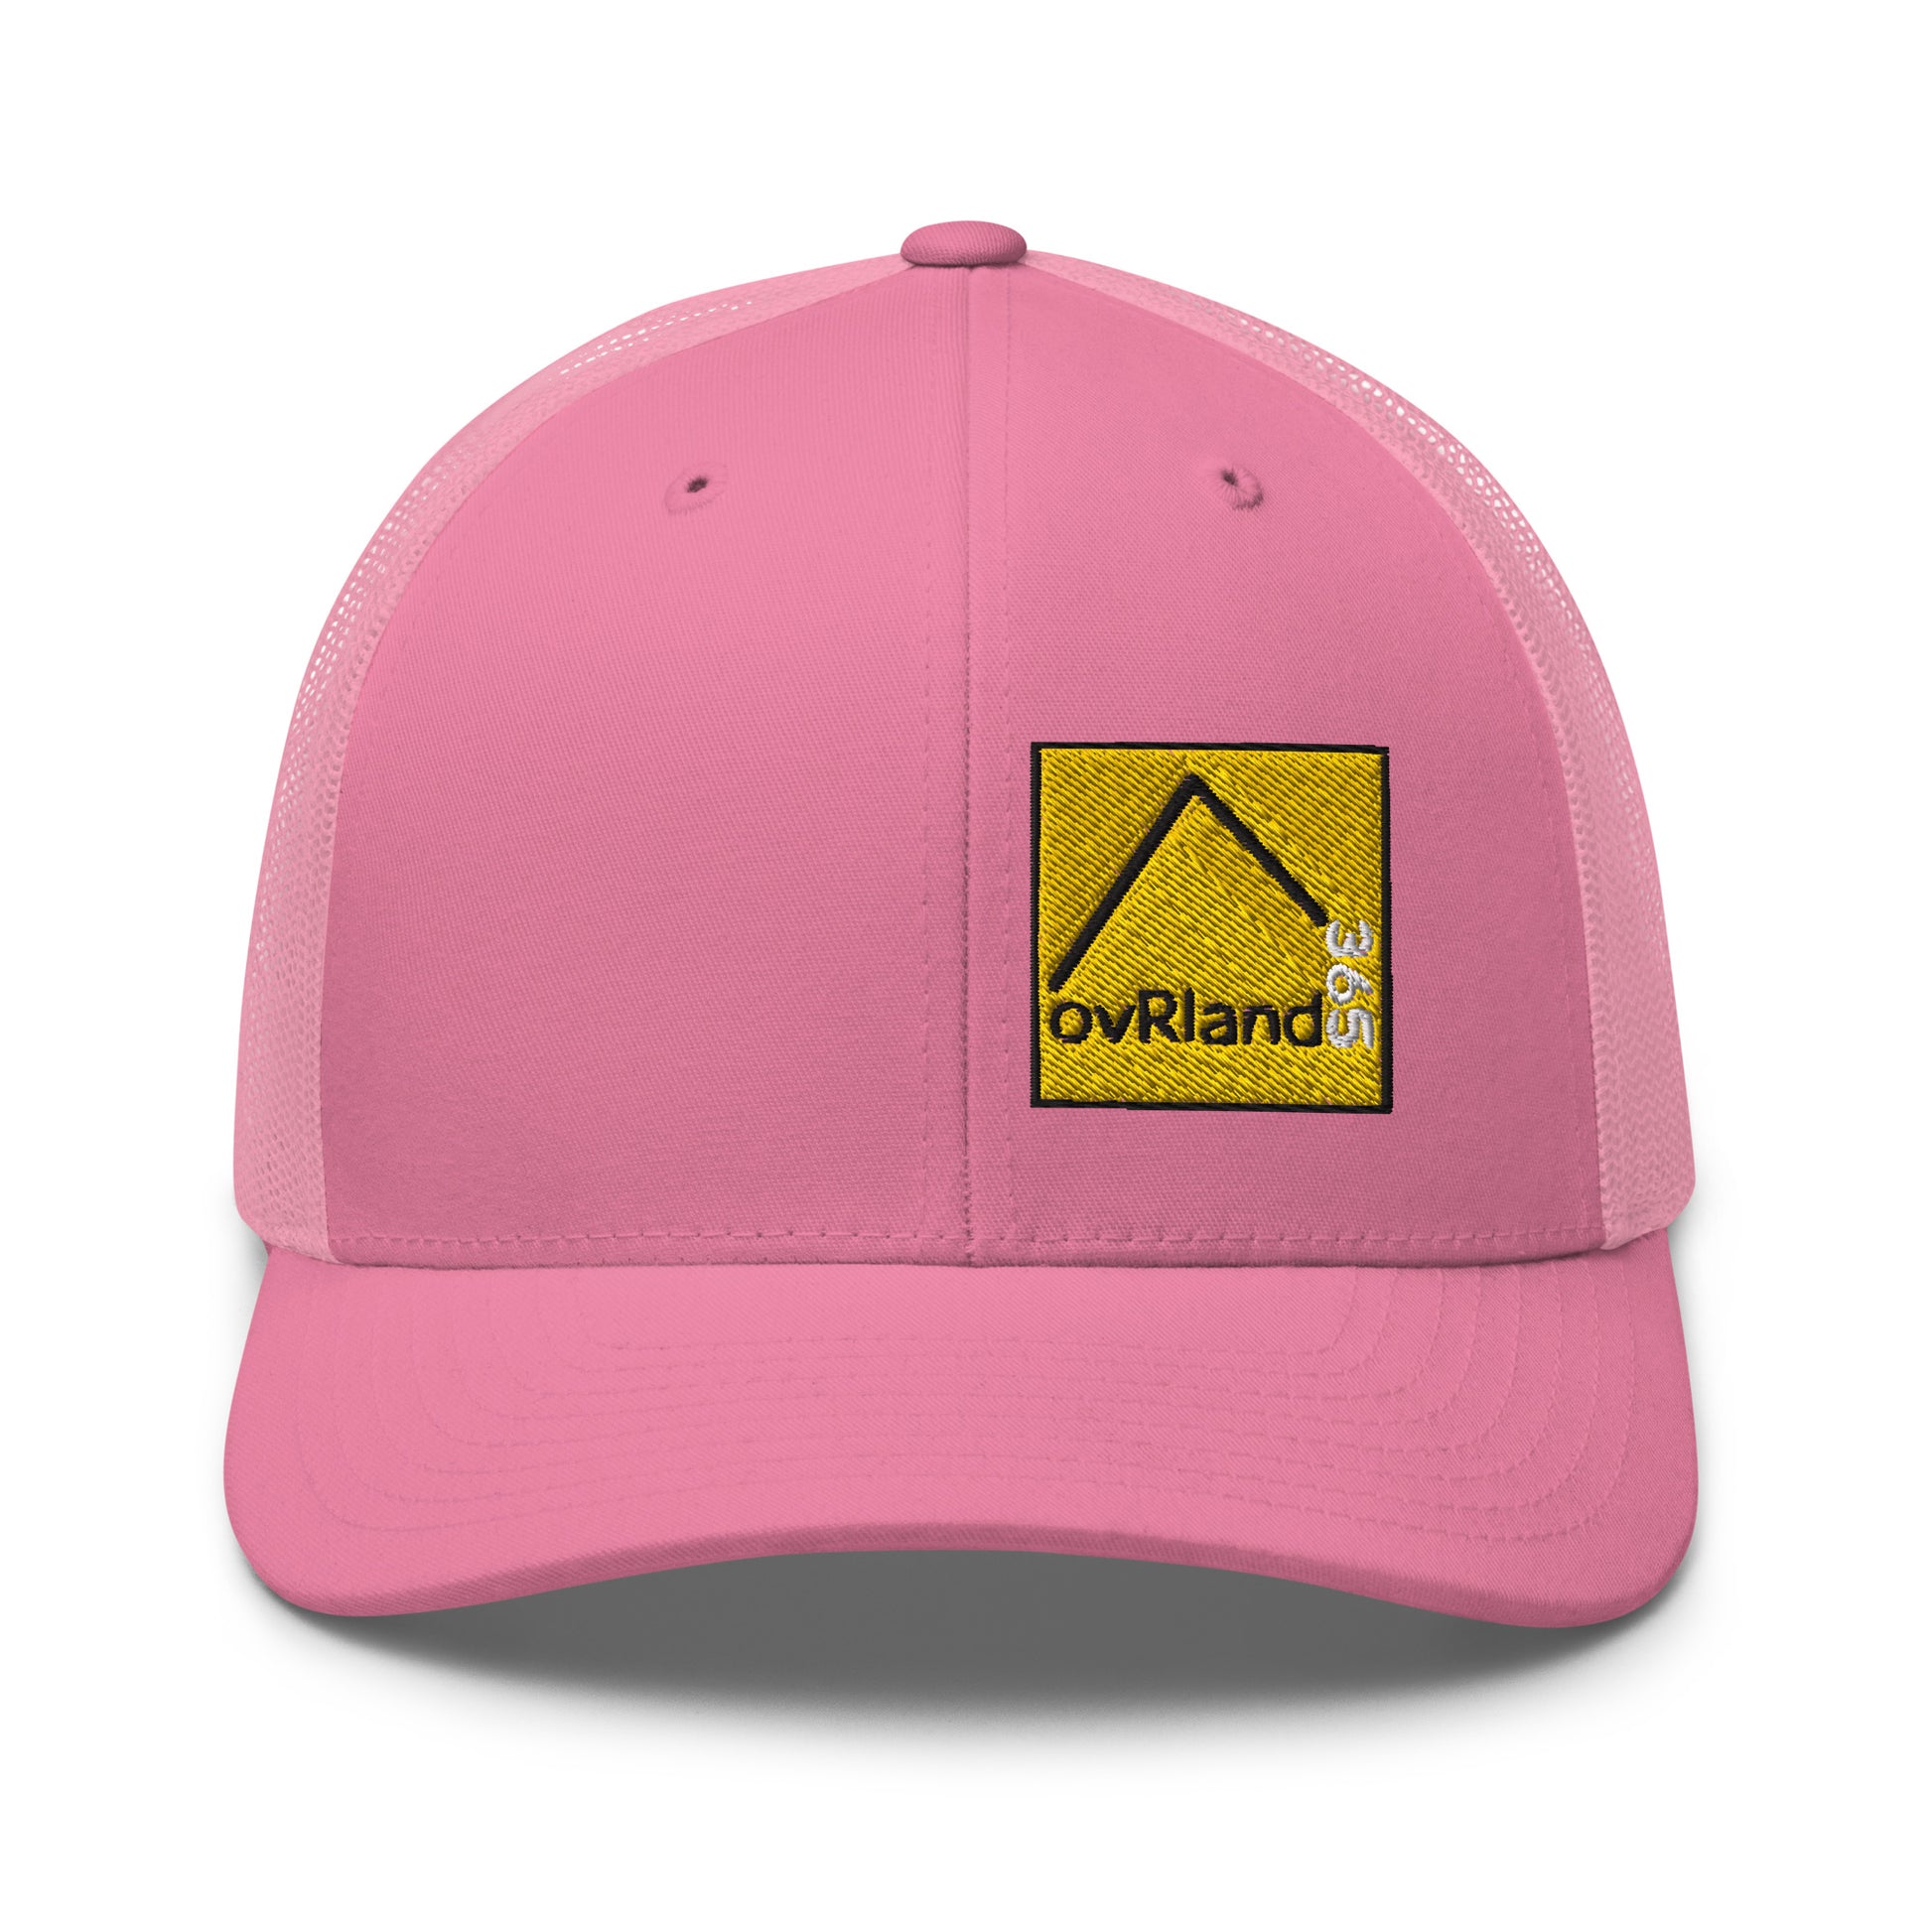 Pink Snap Back Trucker Cap with our square 365 logo. front facing. overland365.com